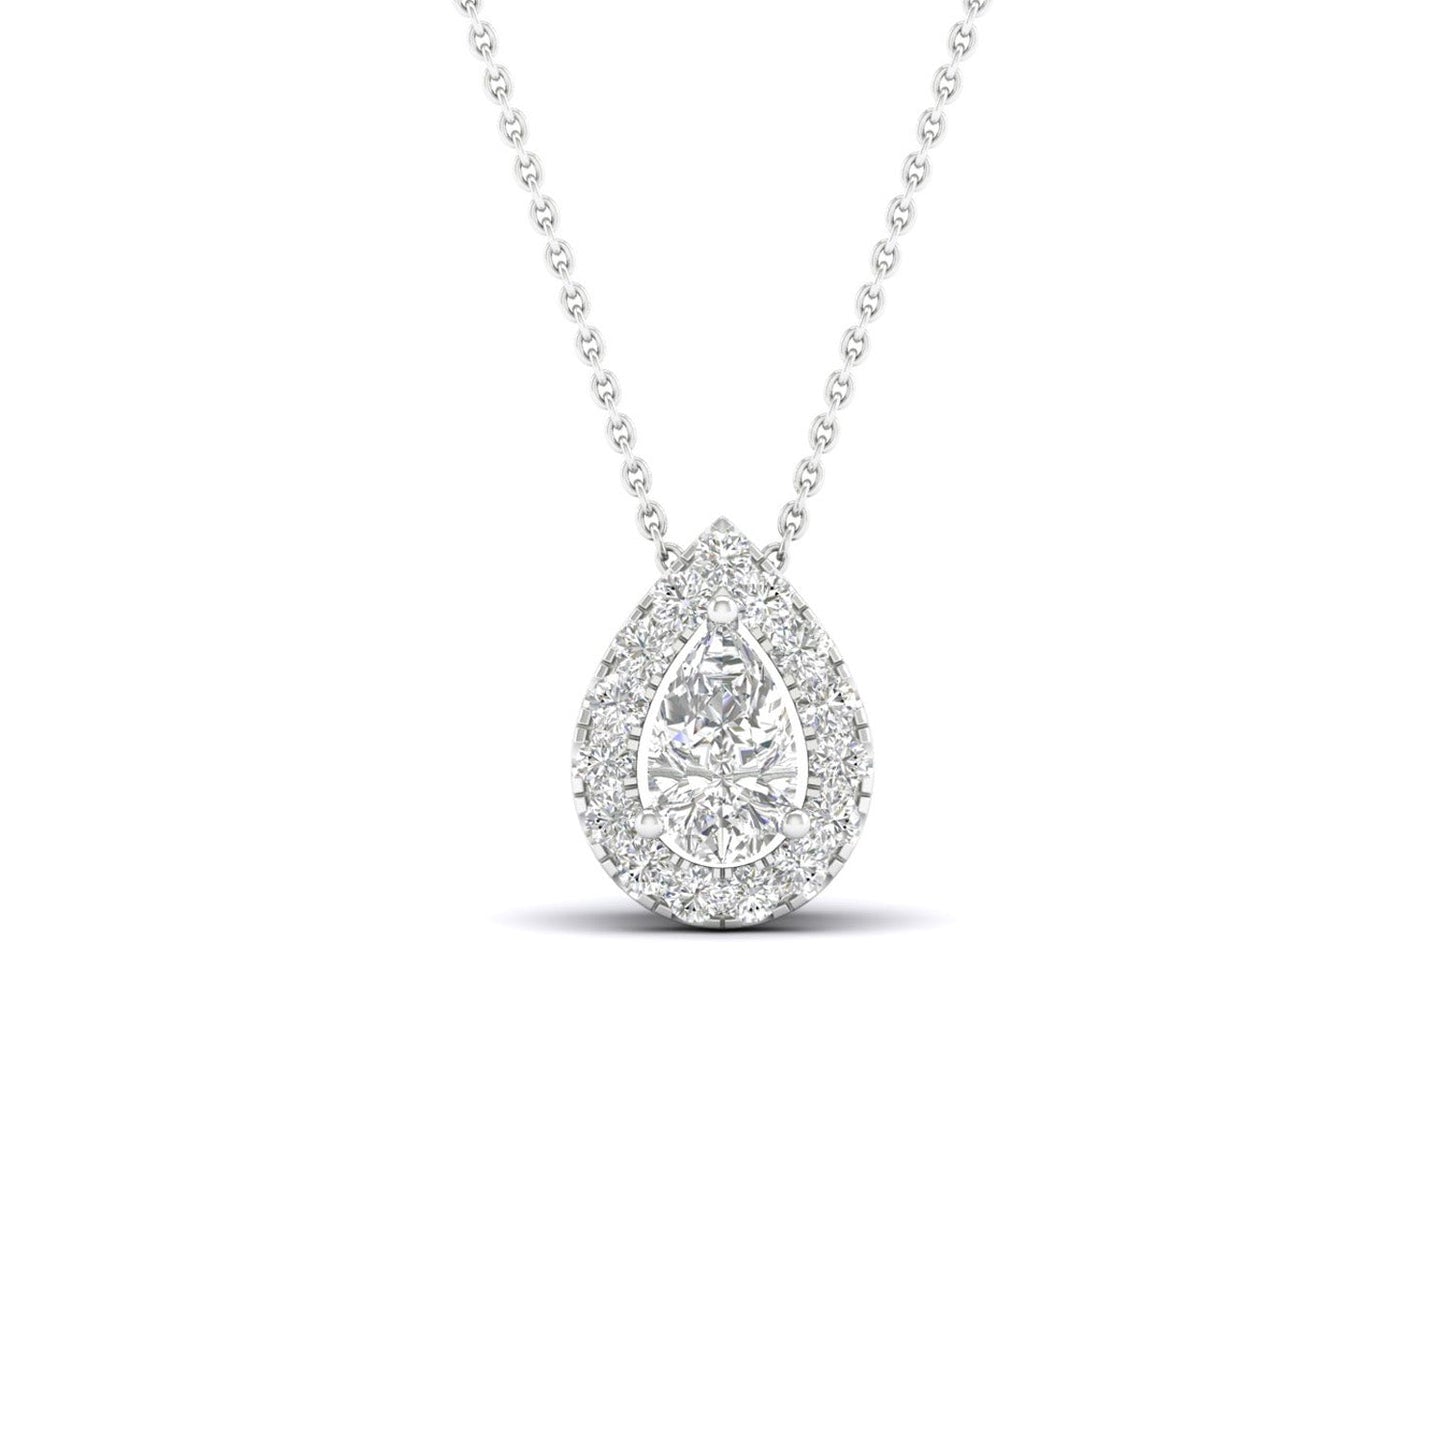 Petite Dewdrop Halo Necklace_Product angle_1/6 Ct. - 1